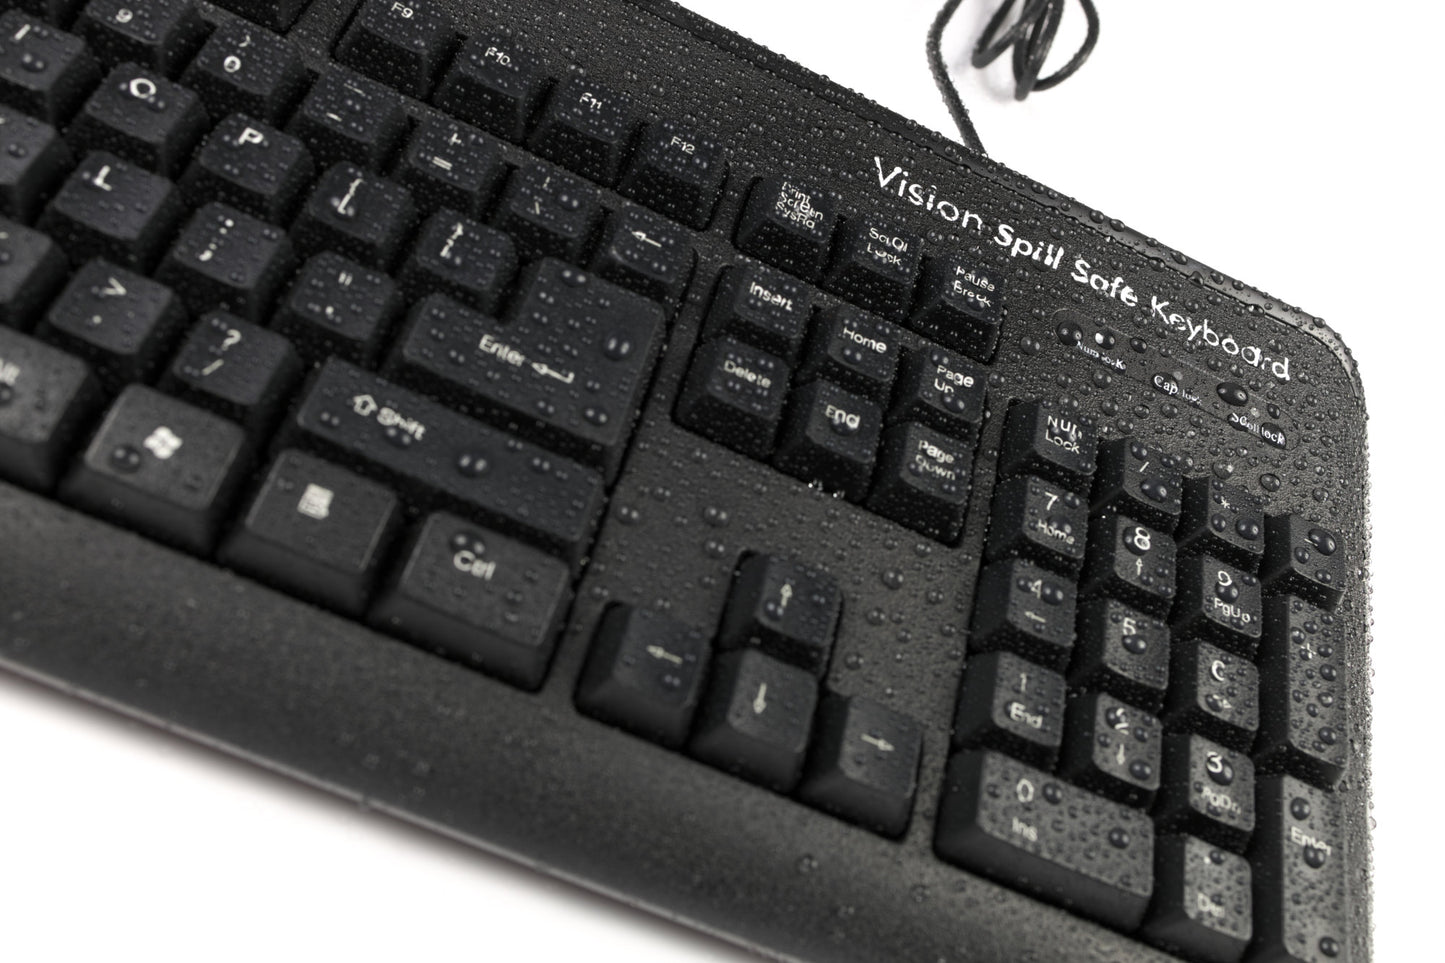 Spill Proof & Washable Keyboard